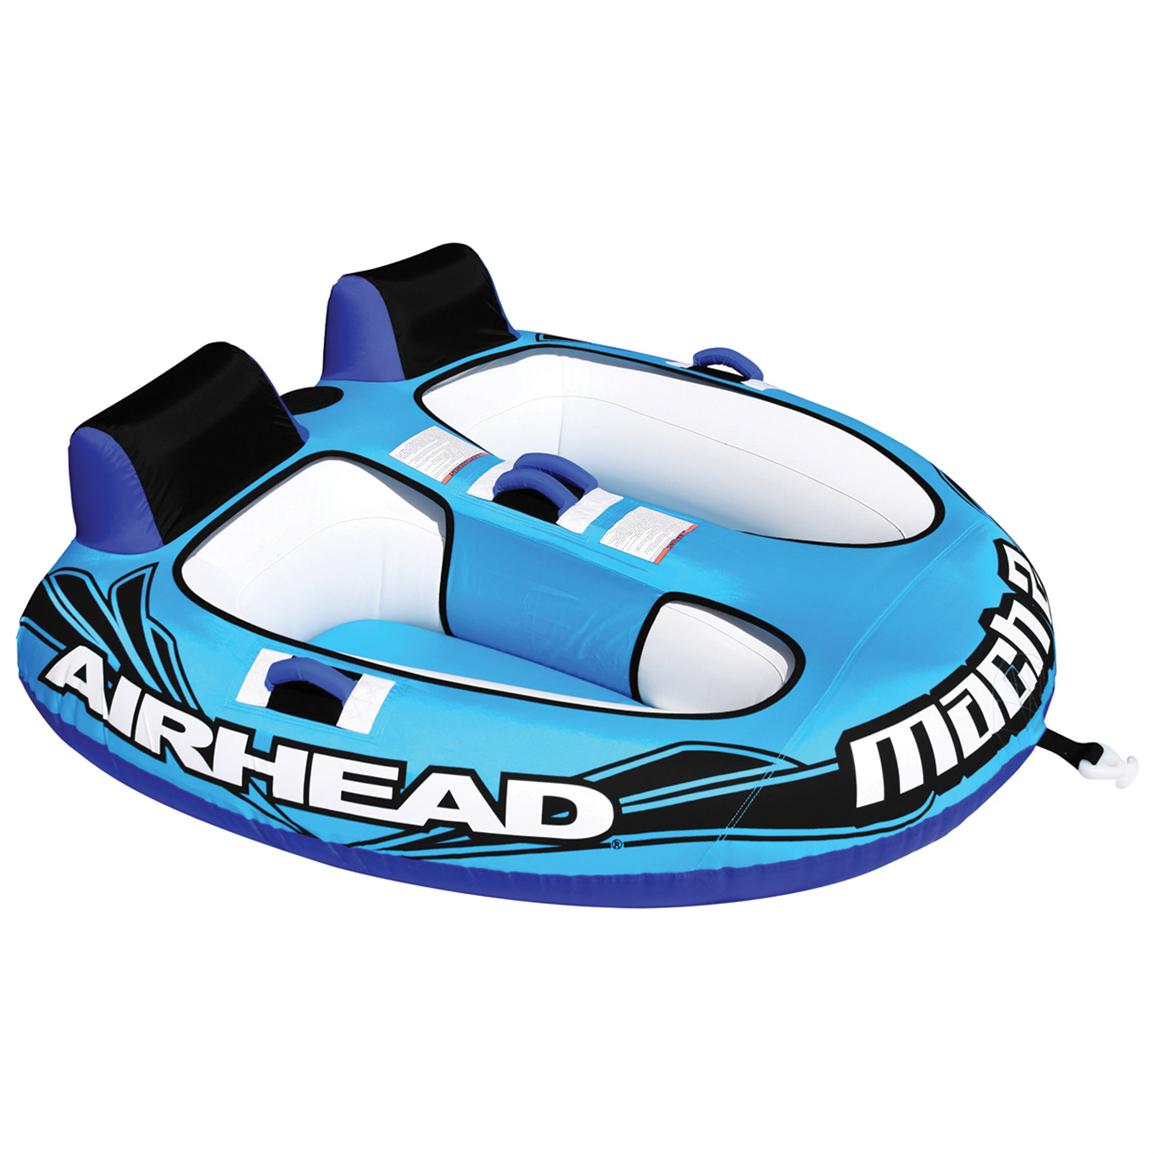 Airhead® Mach 2rider Towable Tube 296405, Tubes & Towables at